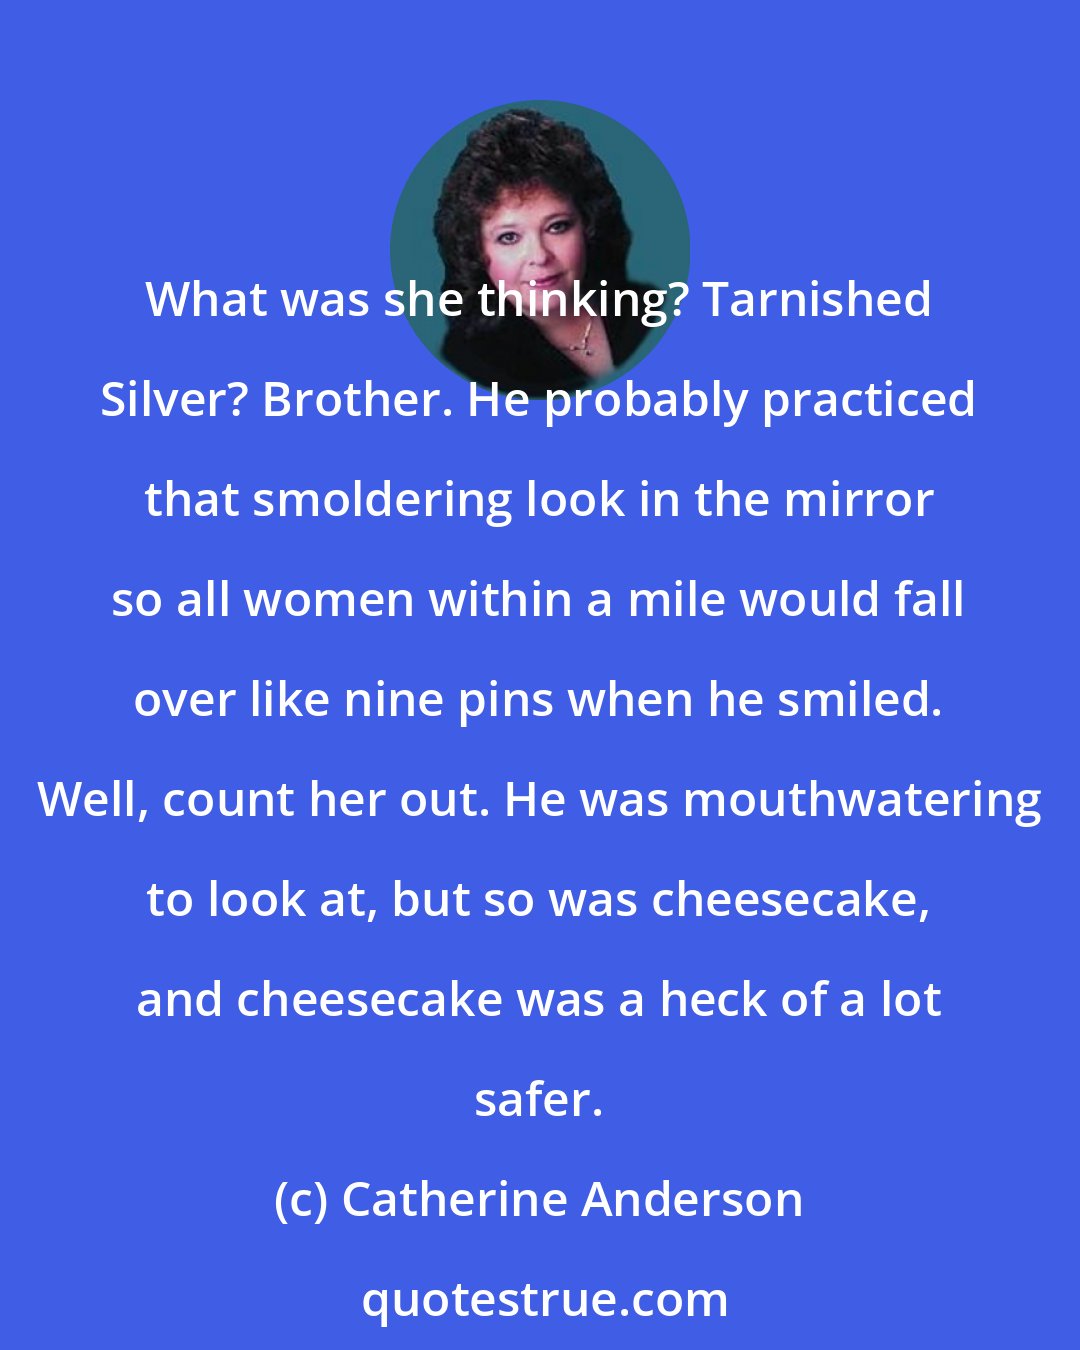 Catherine Anderson: What was she thinking? Tarnished Silver? Brother. He probably practiced that smoldering look in the mirror so all women within a mile would fall over like nine pins when he smiled. Well, count her out. He was mouthwatering to look at, but so was cheesecake, and cheesecake was a heck of a lot safer.